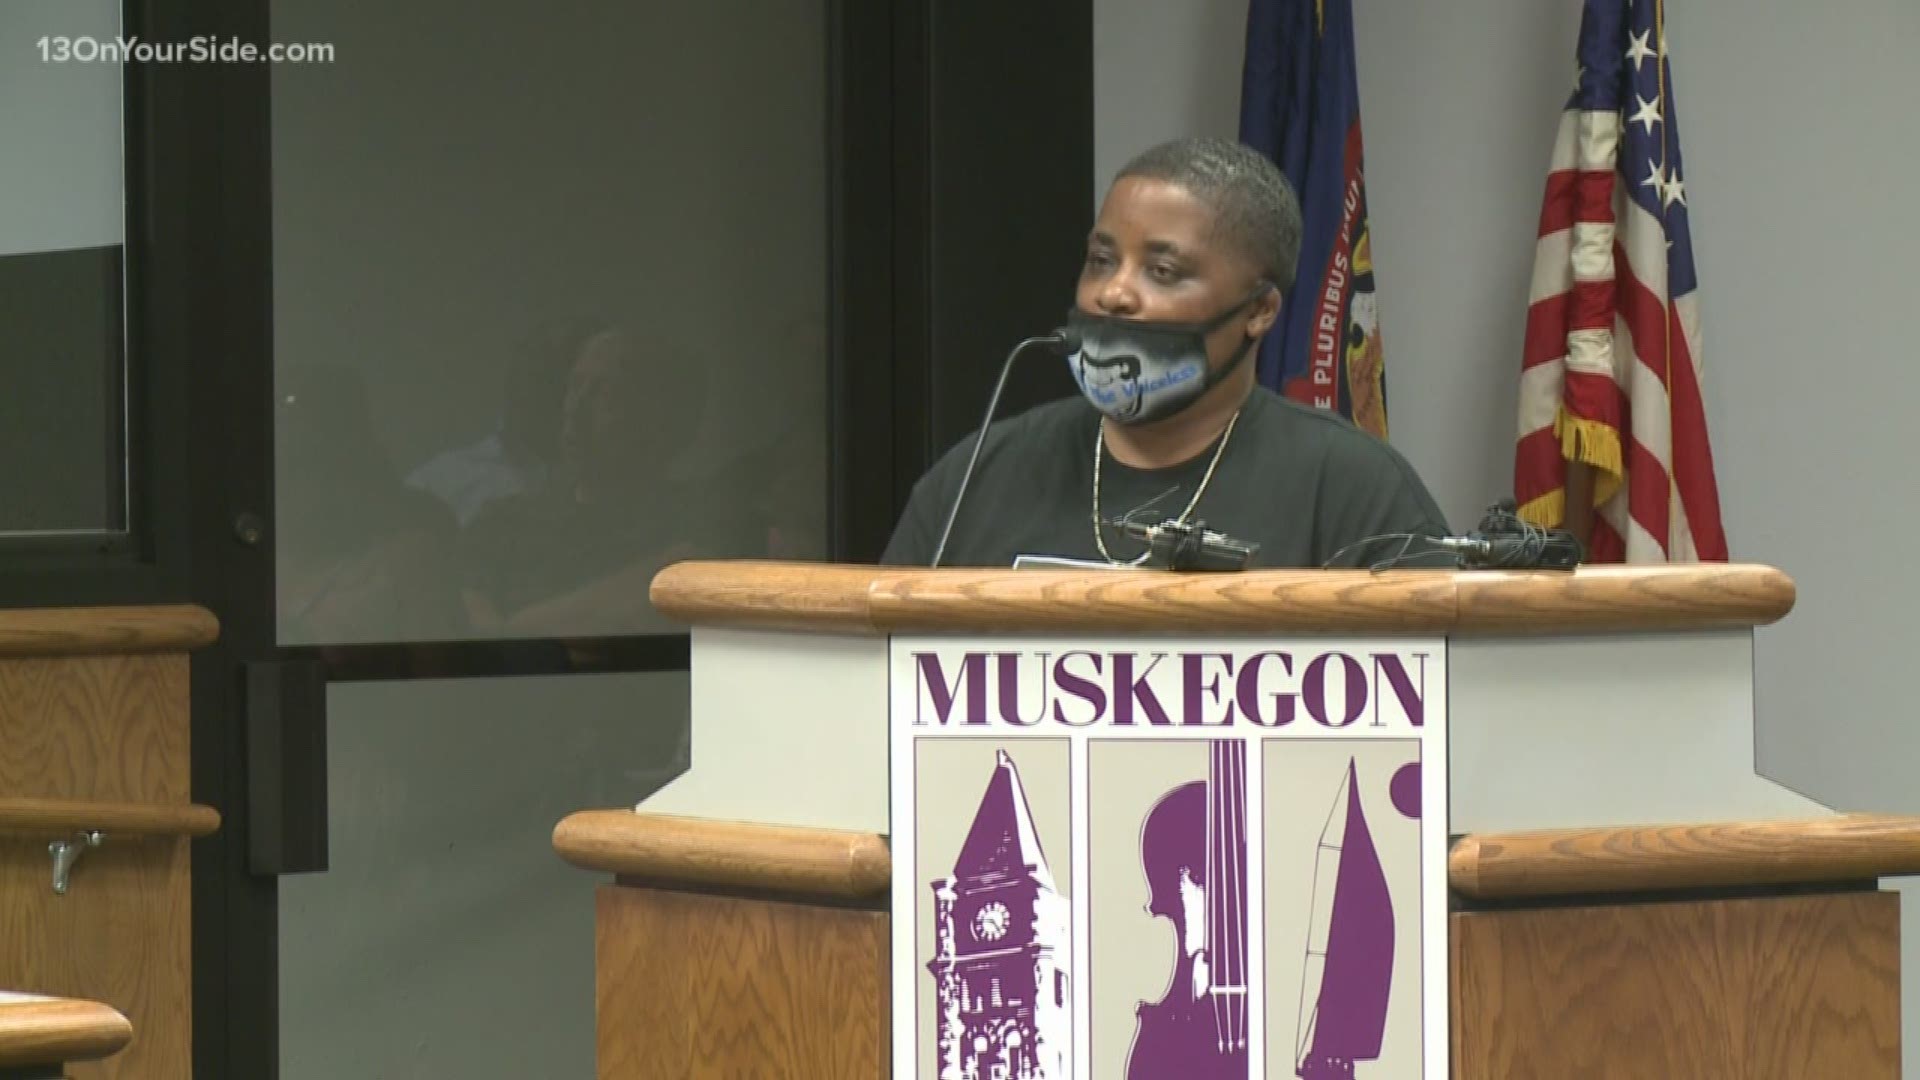 Muskegon community responds after KKK document found in officer's house